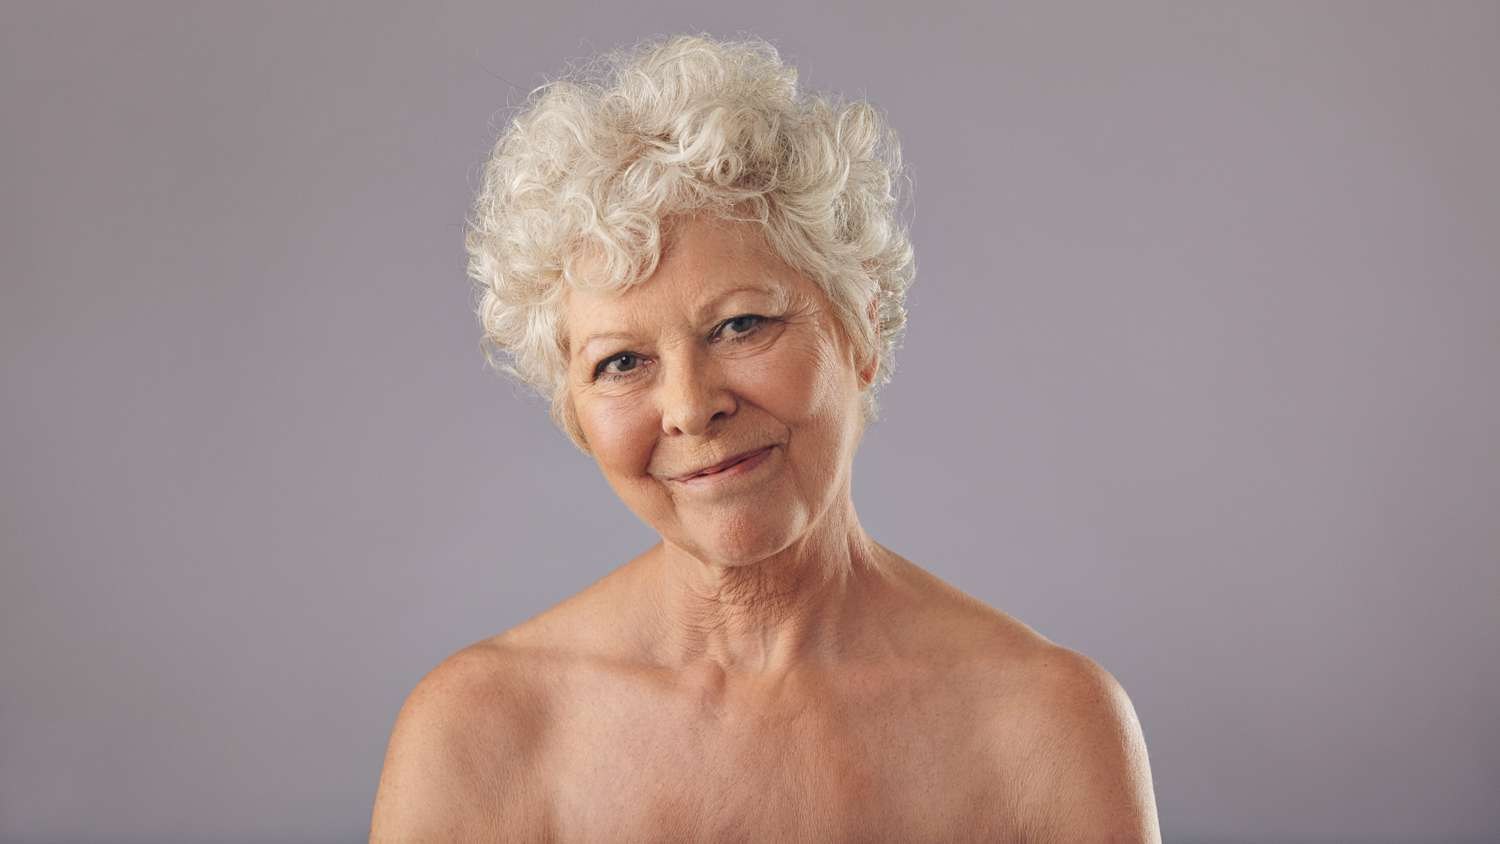 Erotic Elderly with Small Breasts (51 photos)